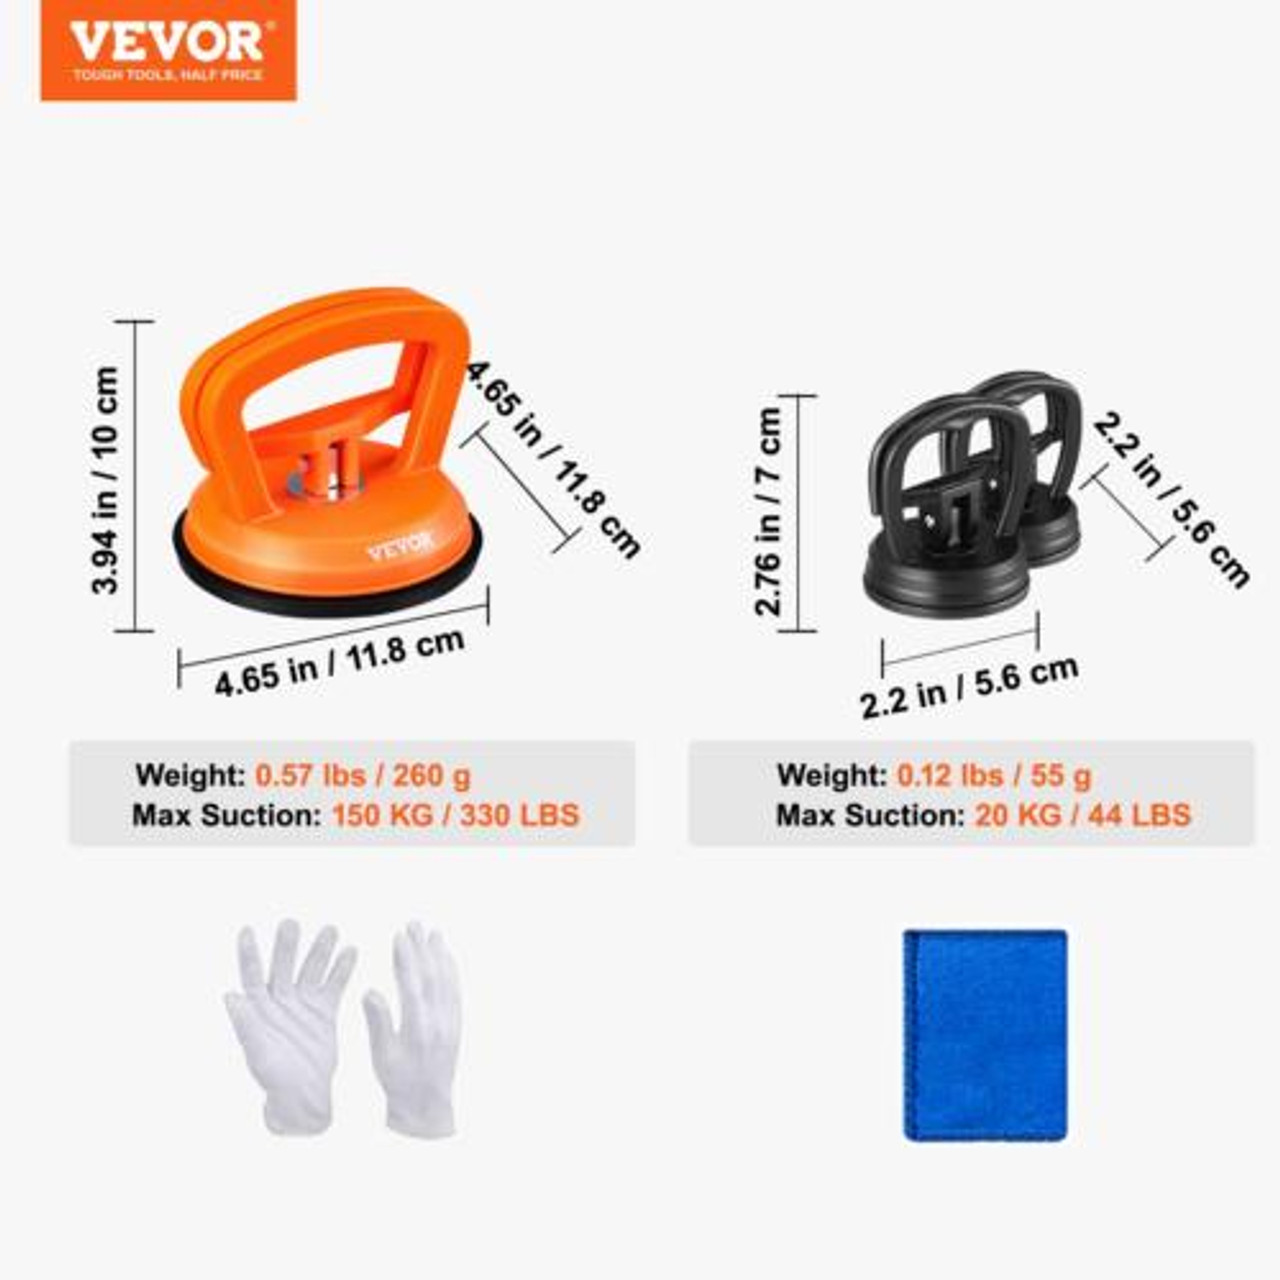 VEVOR Dent Removal Kit, 3 Packs Suction Cups, Dent Puller Handle Lifter with Glo